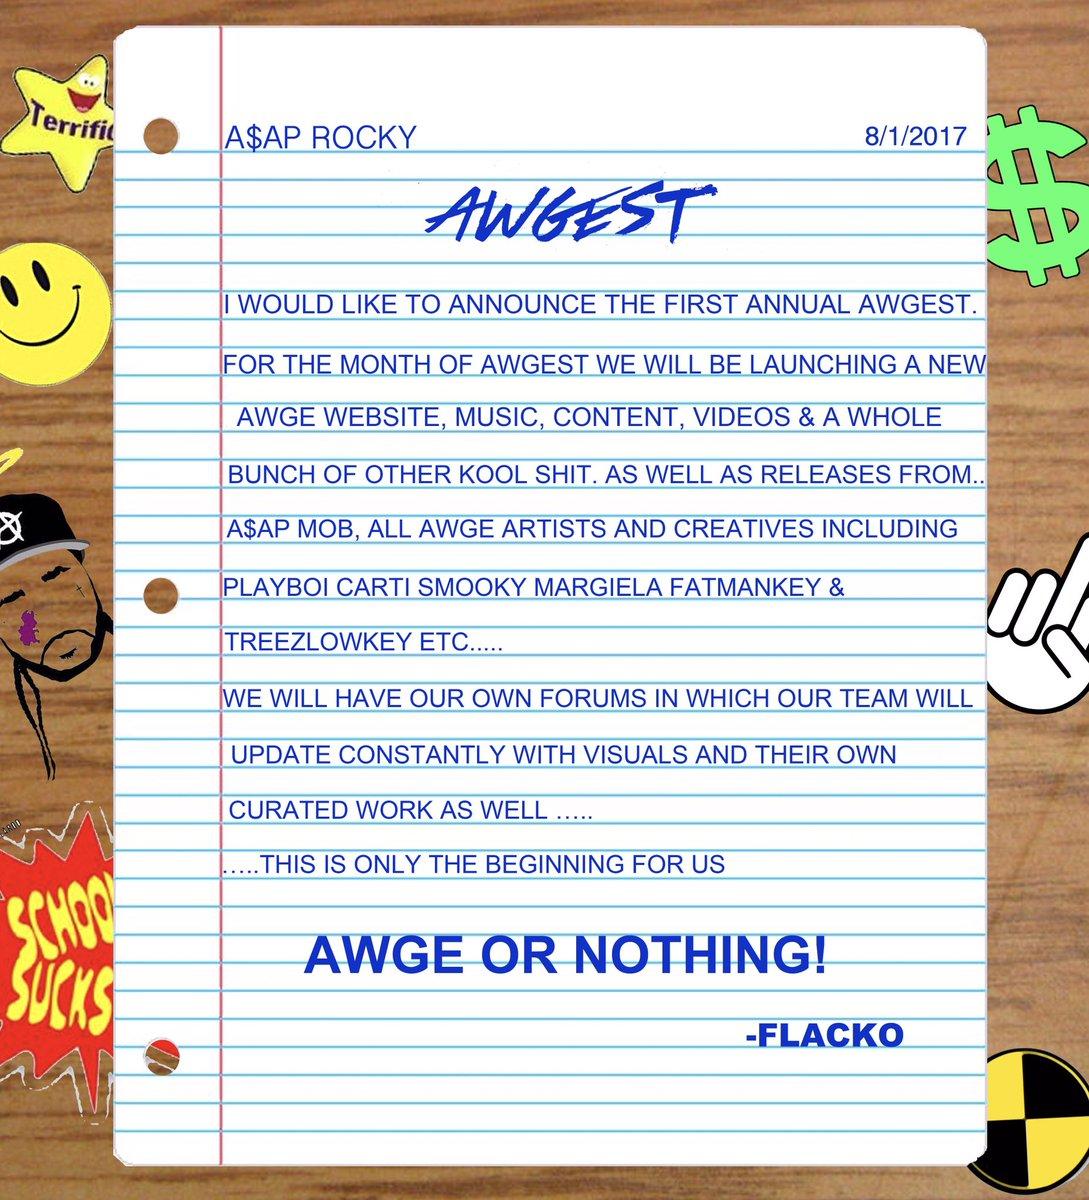 A$AP Rocky Announces New Releases from A$AP Mob and Reveals